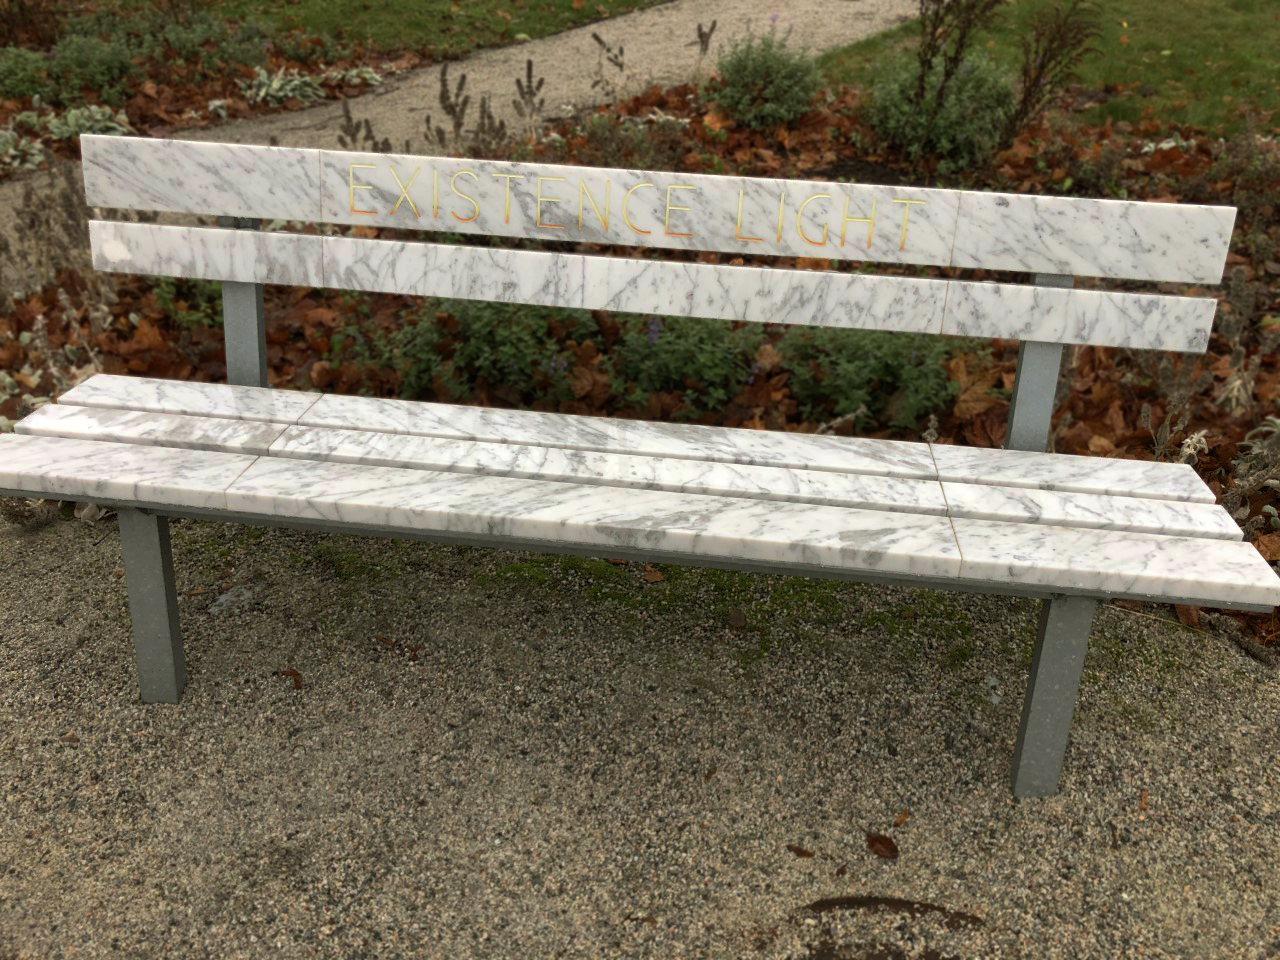 A park bench where the slats consist of marble instead of ordinary wood.